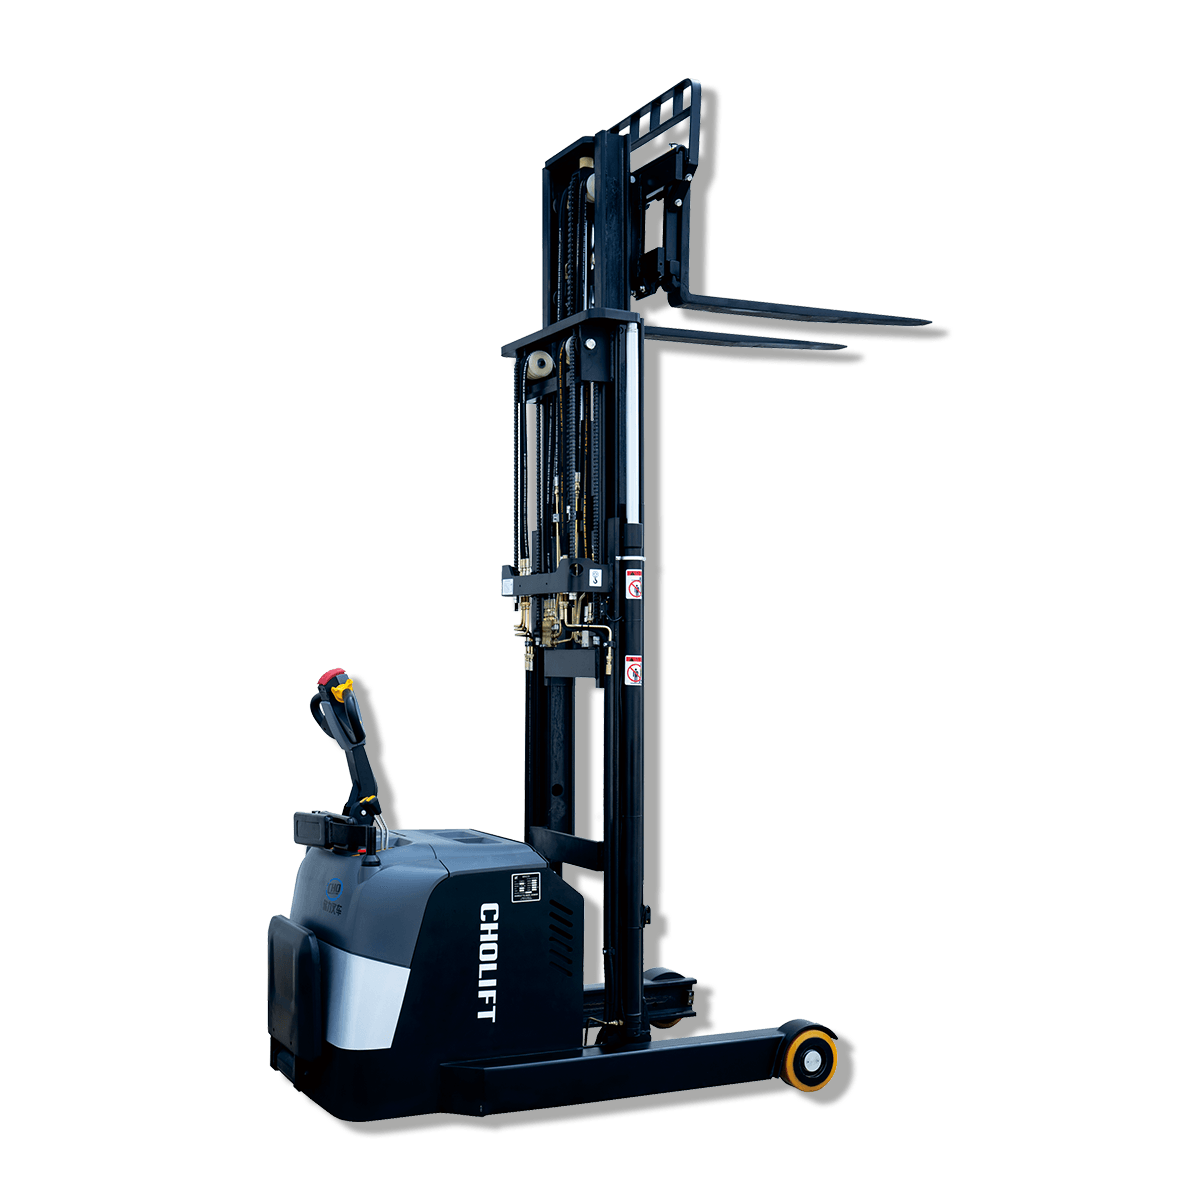 How do full-electric stackers maneuver in tight spaces?